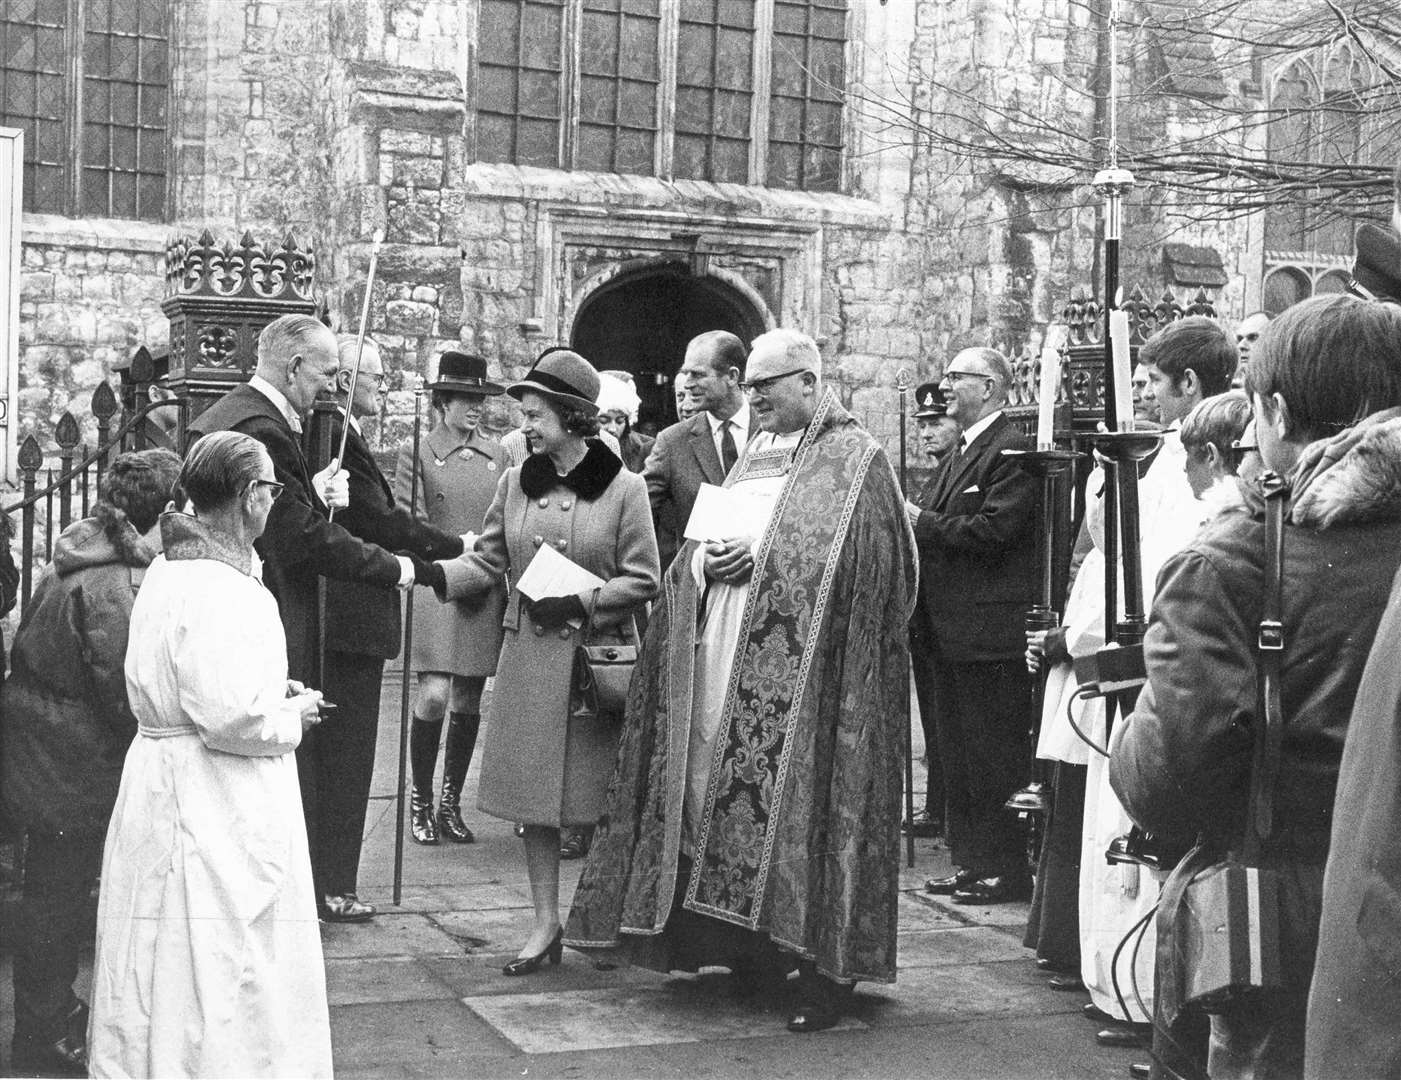 In 1970, Queen Elizabeth II with the Duke of Edinburgh, Prince Andrew and Princess Anne, escorted by Canon Neville Sharp, were introduced to churchwarden Percy Woods and other church officials after the celebrations to mark the 500th anniversary of the re-building of Ashford Parish Church